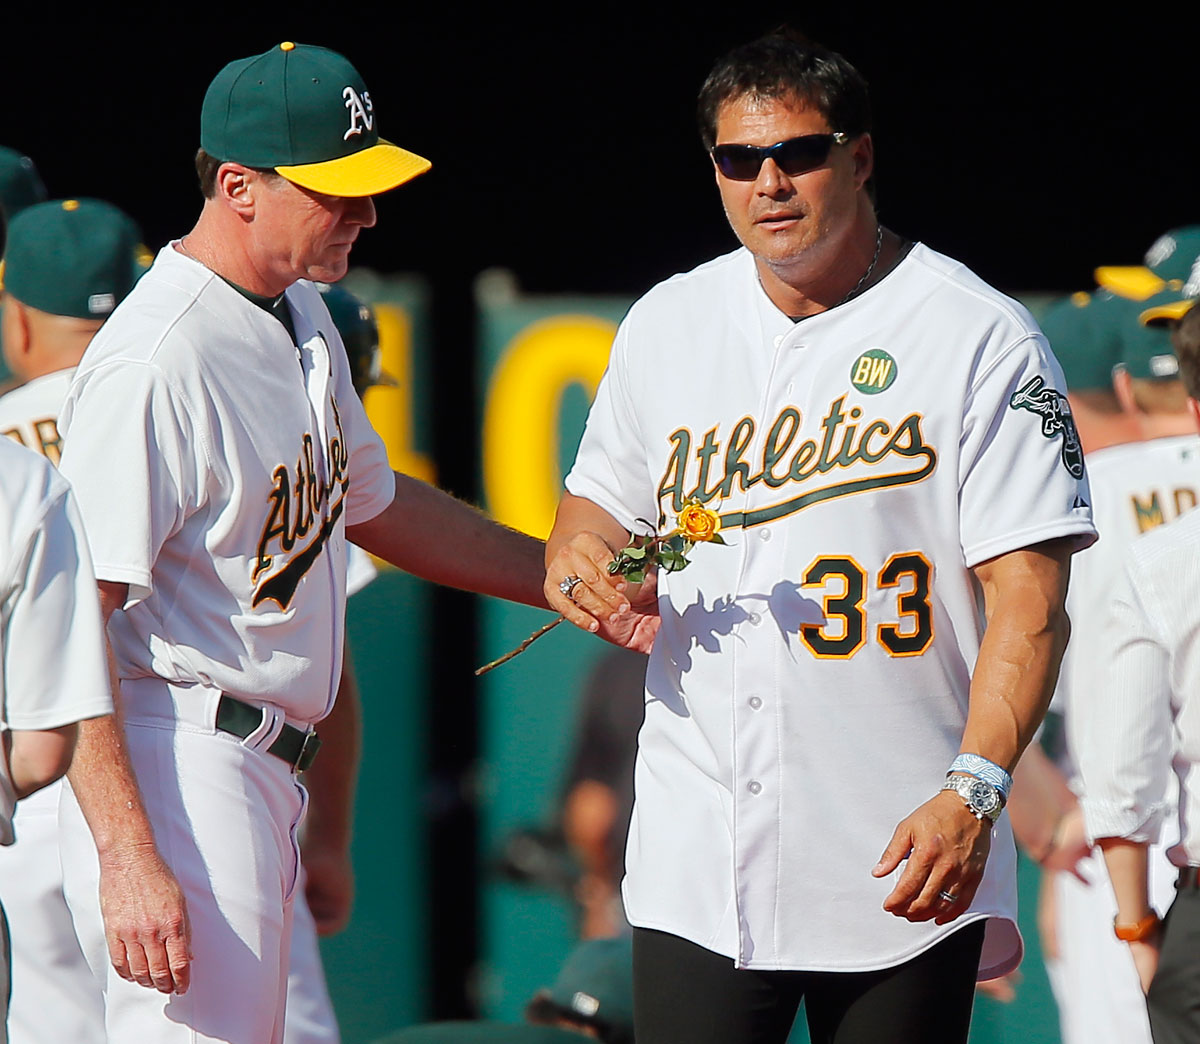 Jose Canseco’s finger falls off